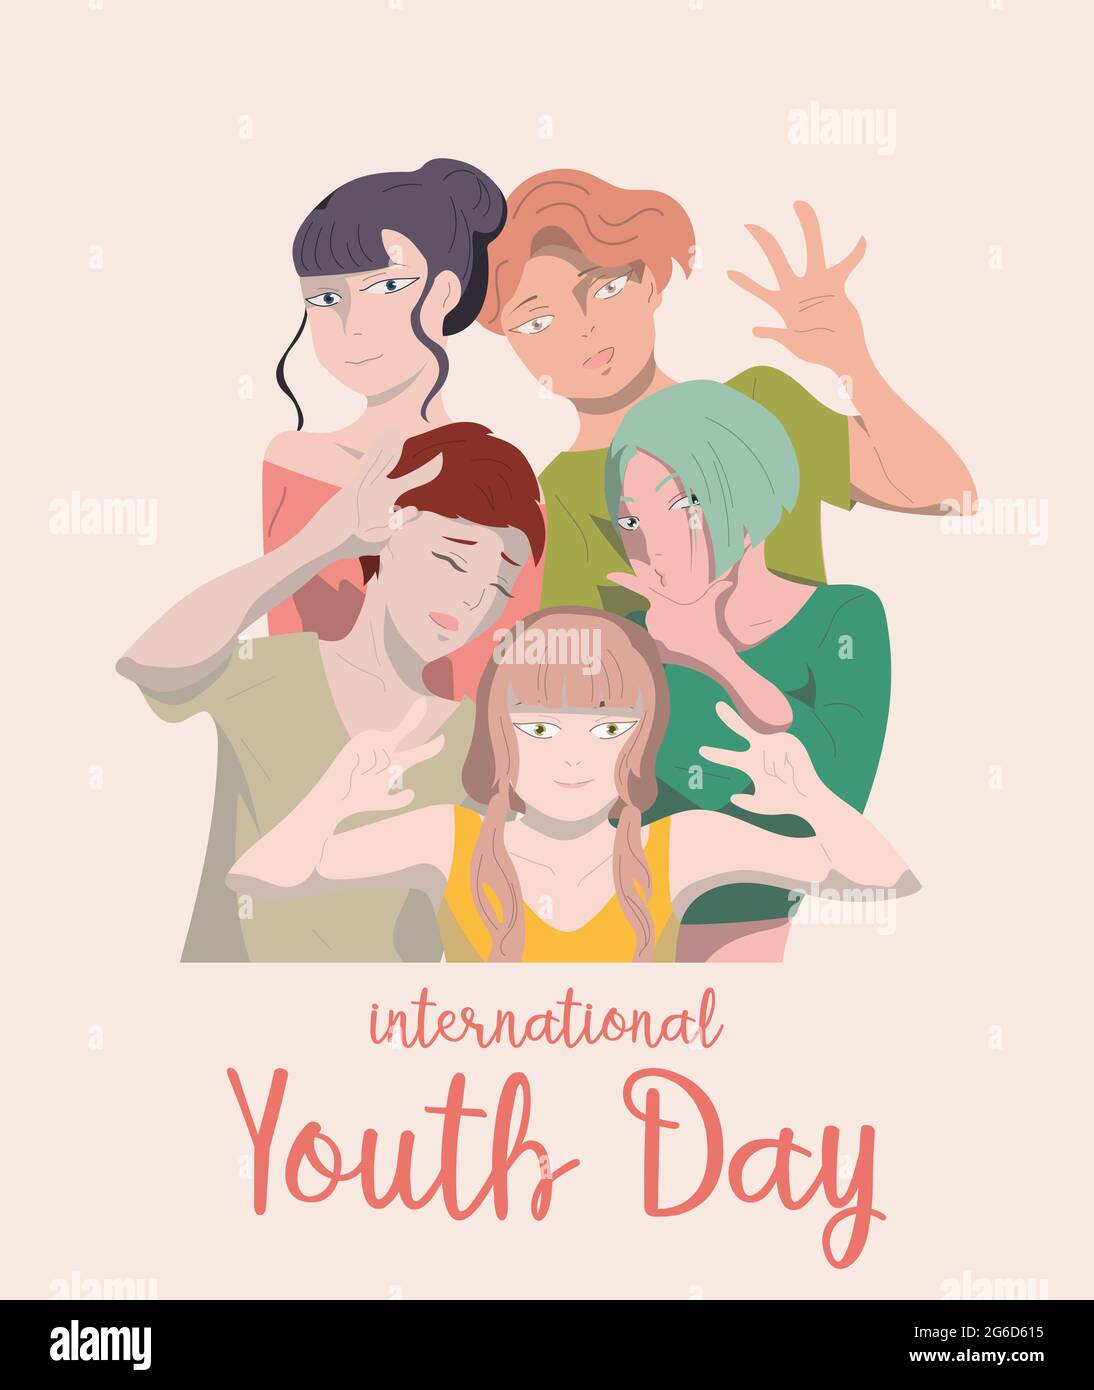 International Youth Day. Doodle vector illustration. Illustration in a flat style together for a holiday celebration. A group of friends consisting of Stock Vector